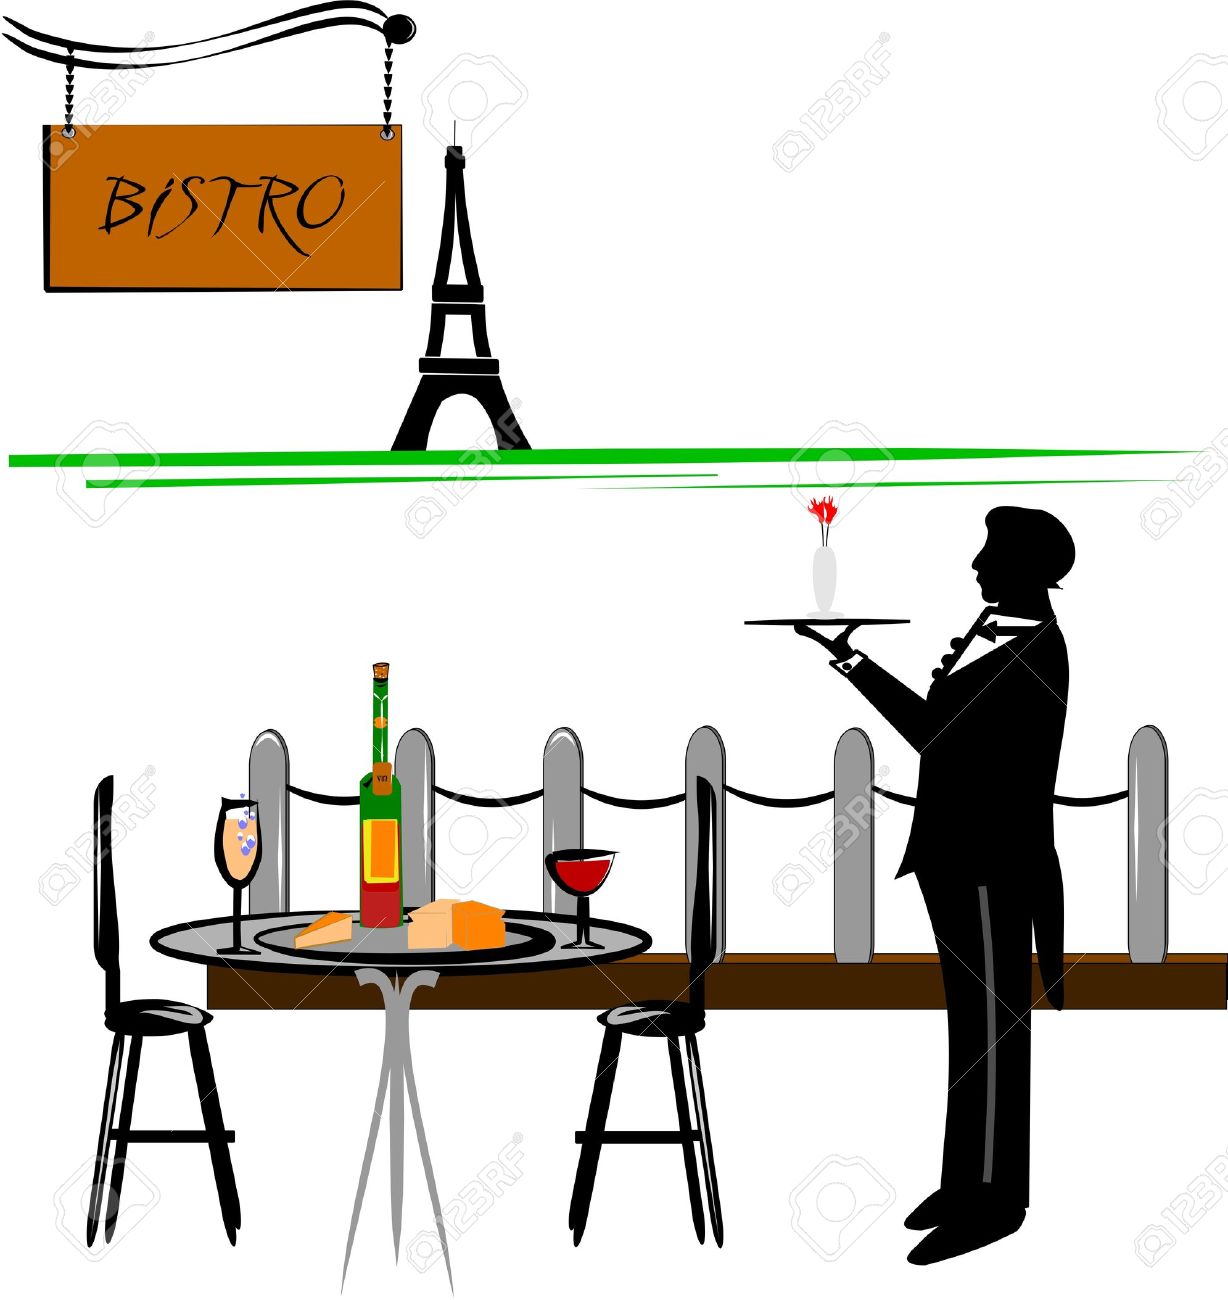 free clipart restaurant table - photo #20